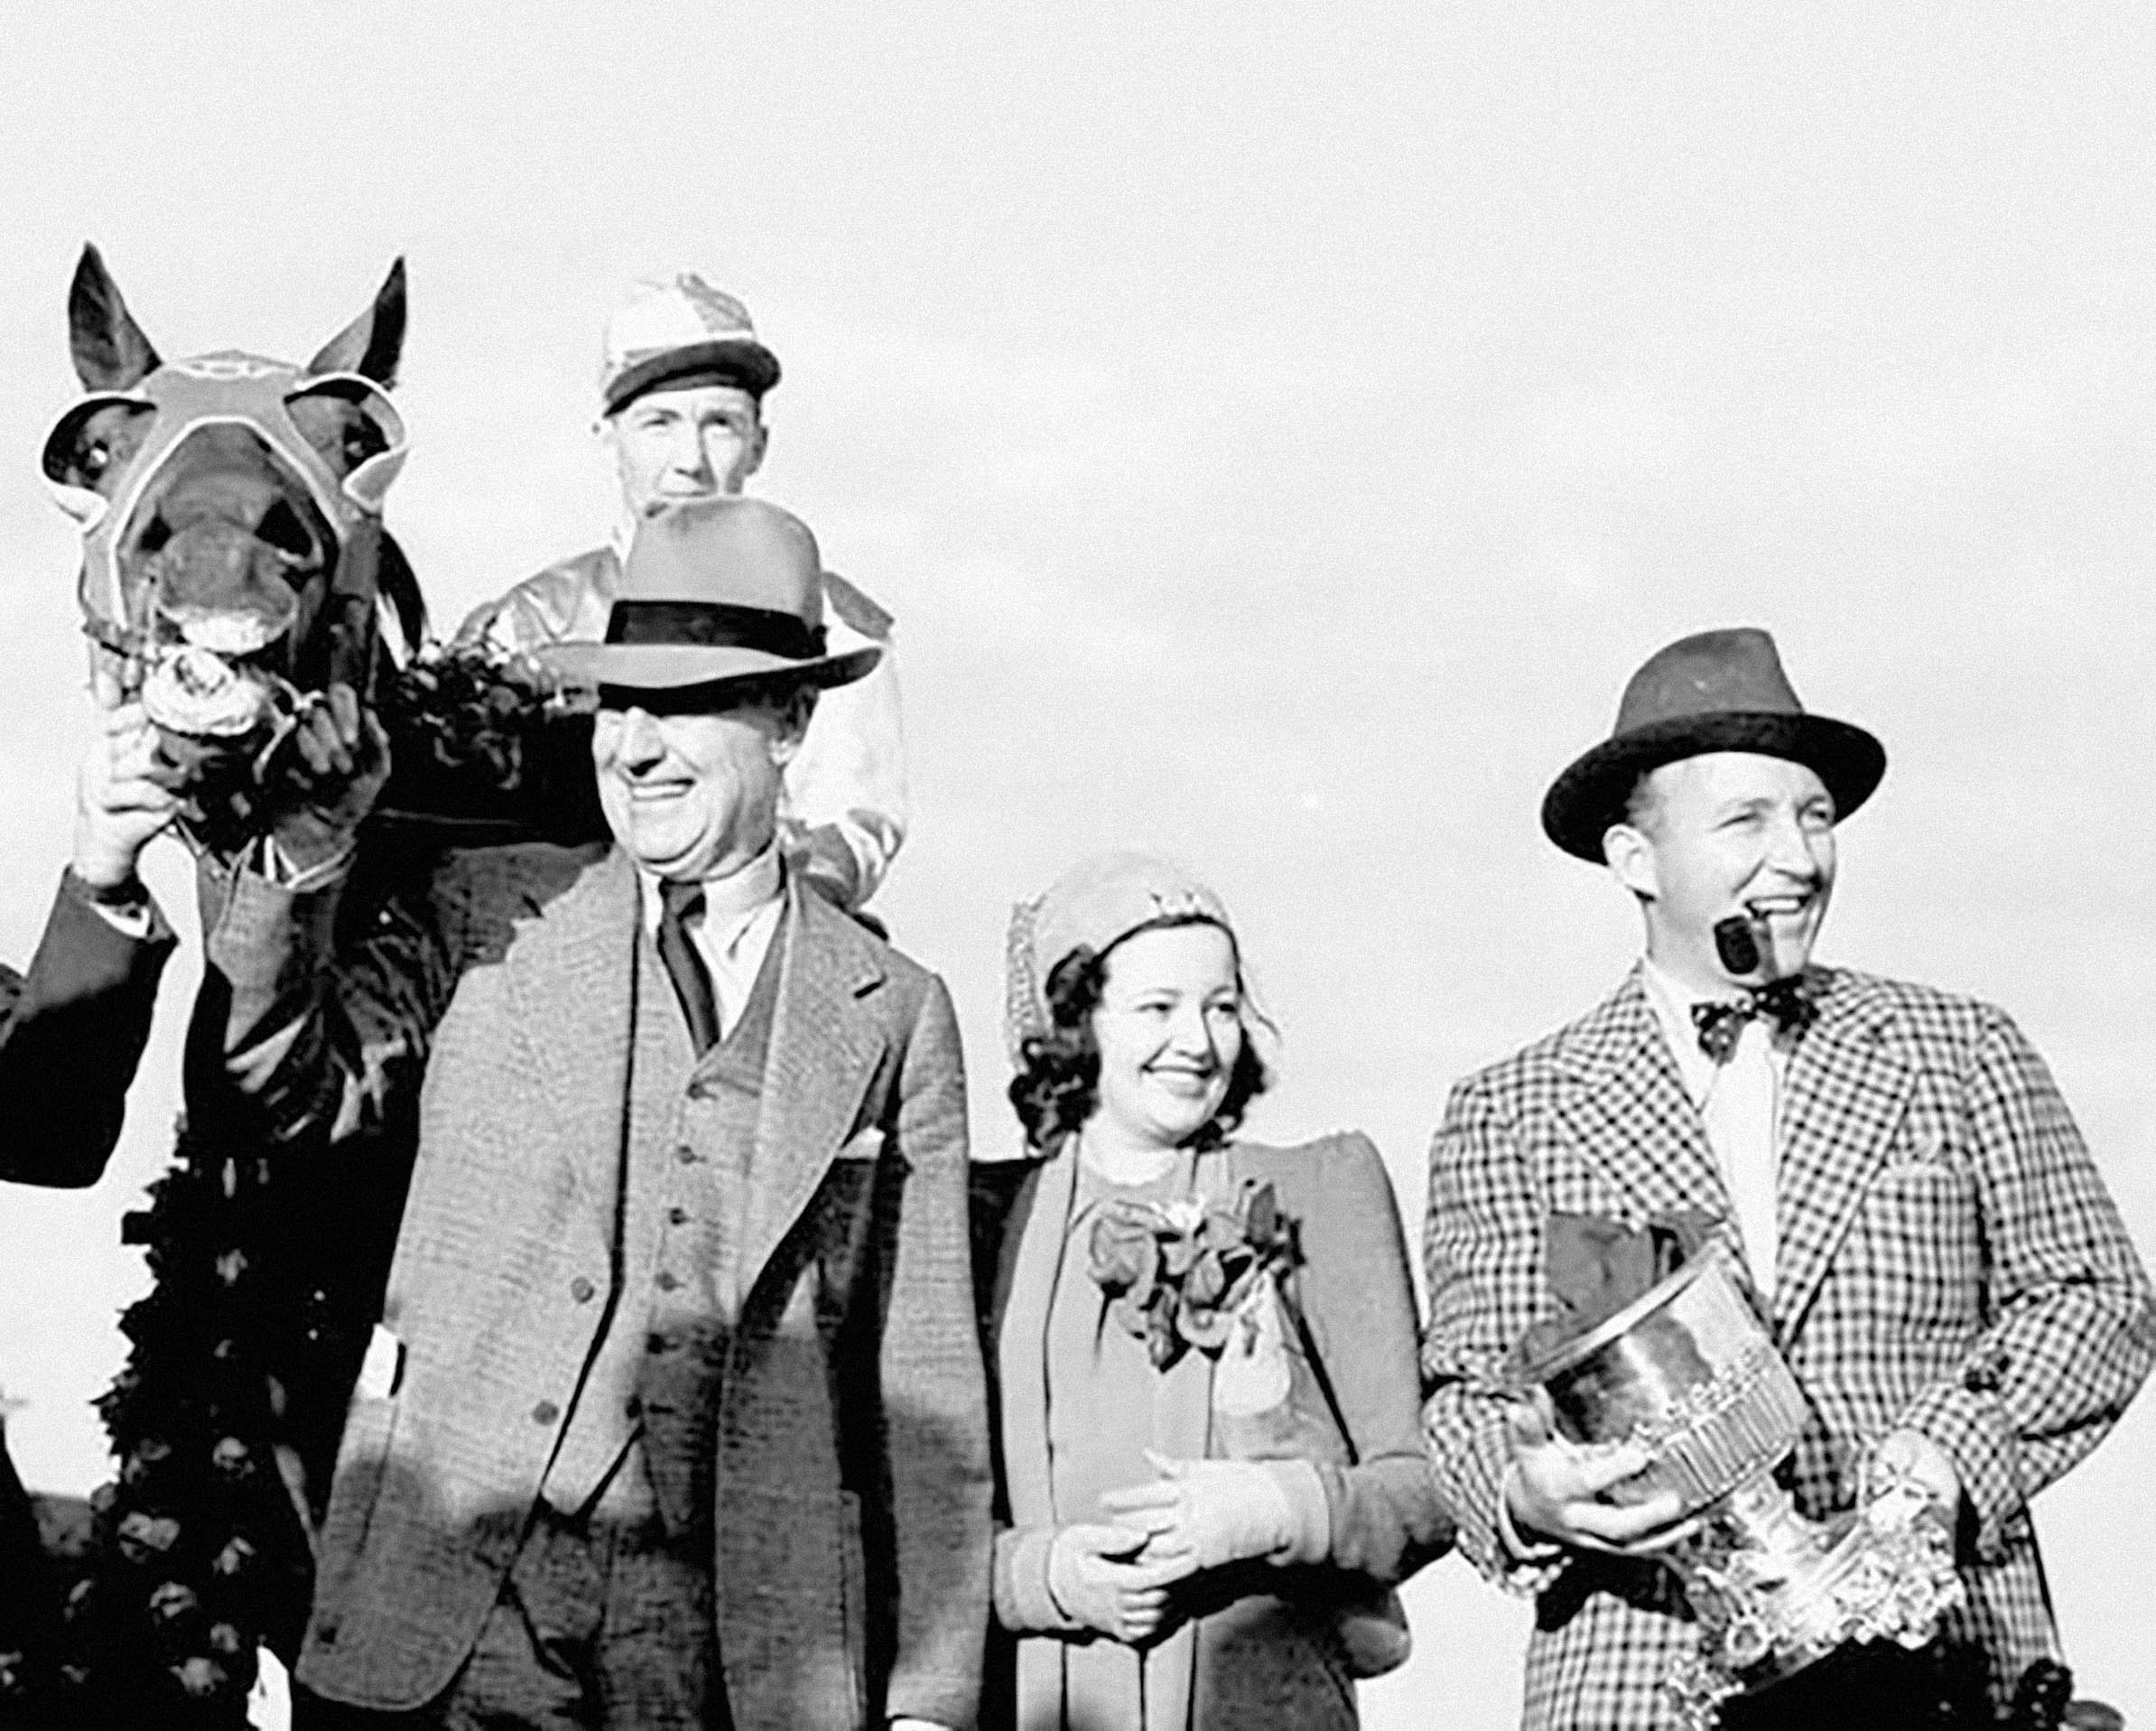 Seabiscuit after winning at Agua Caliente in Mexico in 1938 with Charles Howard and Bing Crosby, who is holding a trophy later stolen but recovered 60 years later by the FBI